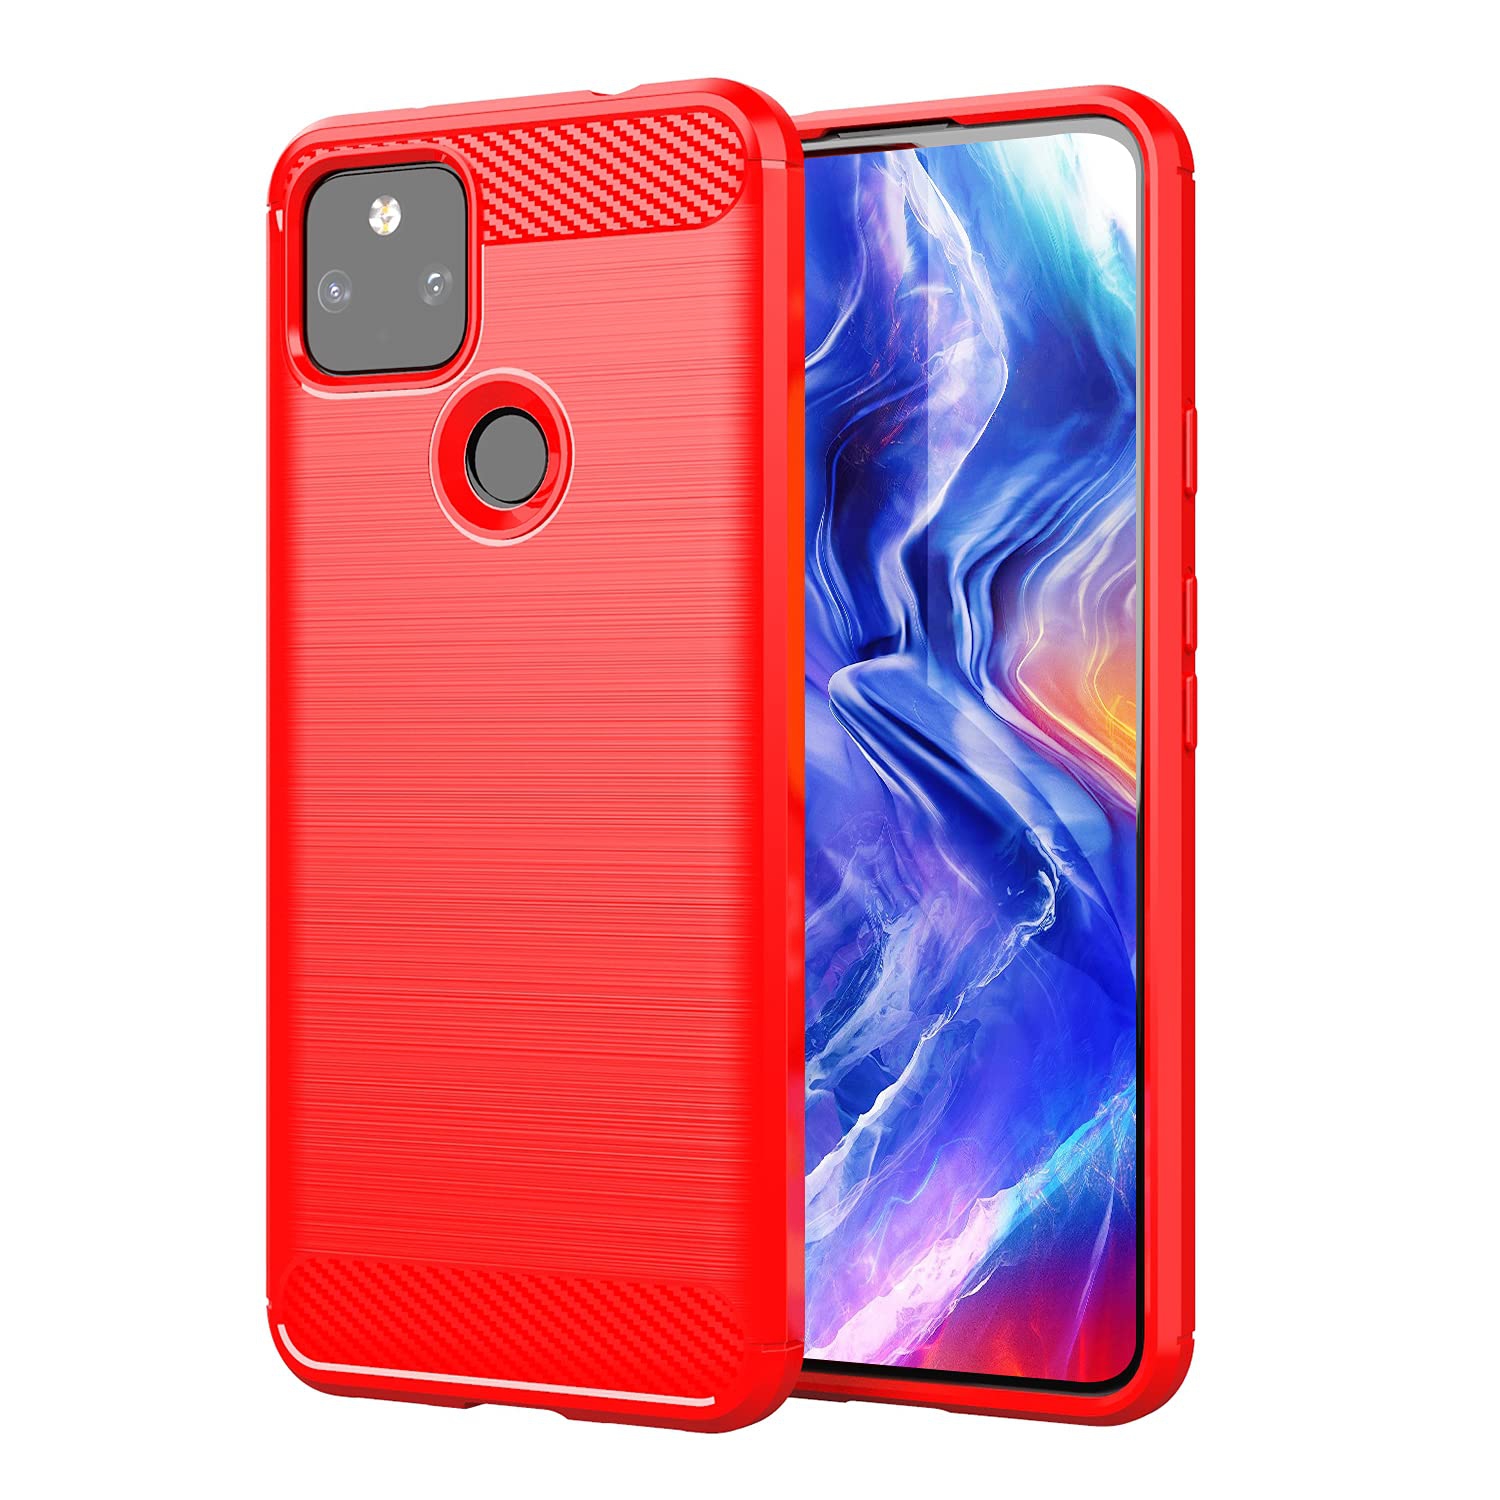 Case for Google Pixel 5A Case Pixel 5A Coque, Red Carbon Fiber Effect Gel Grip Protection Cover Anti Scratch Anti Collision , Case Compatible with The Google 5A